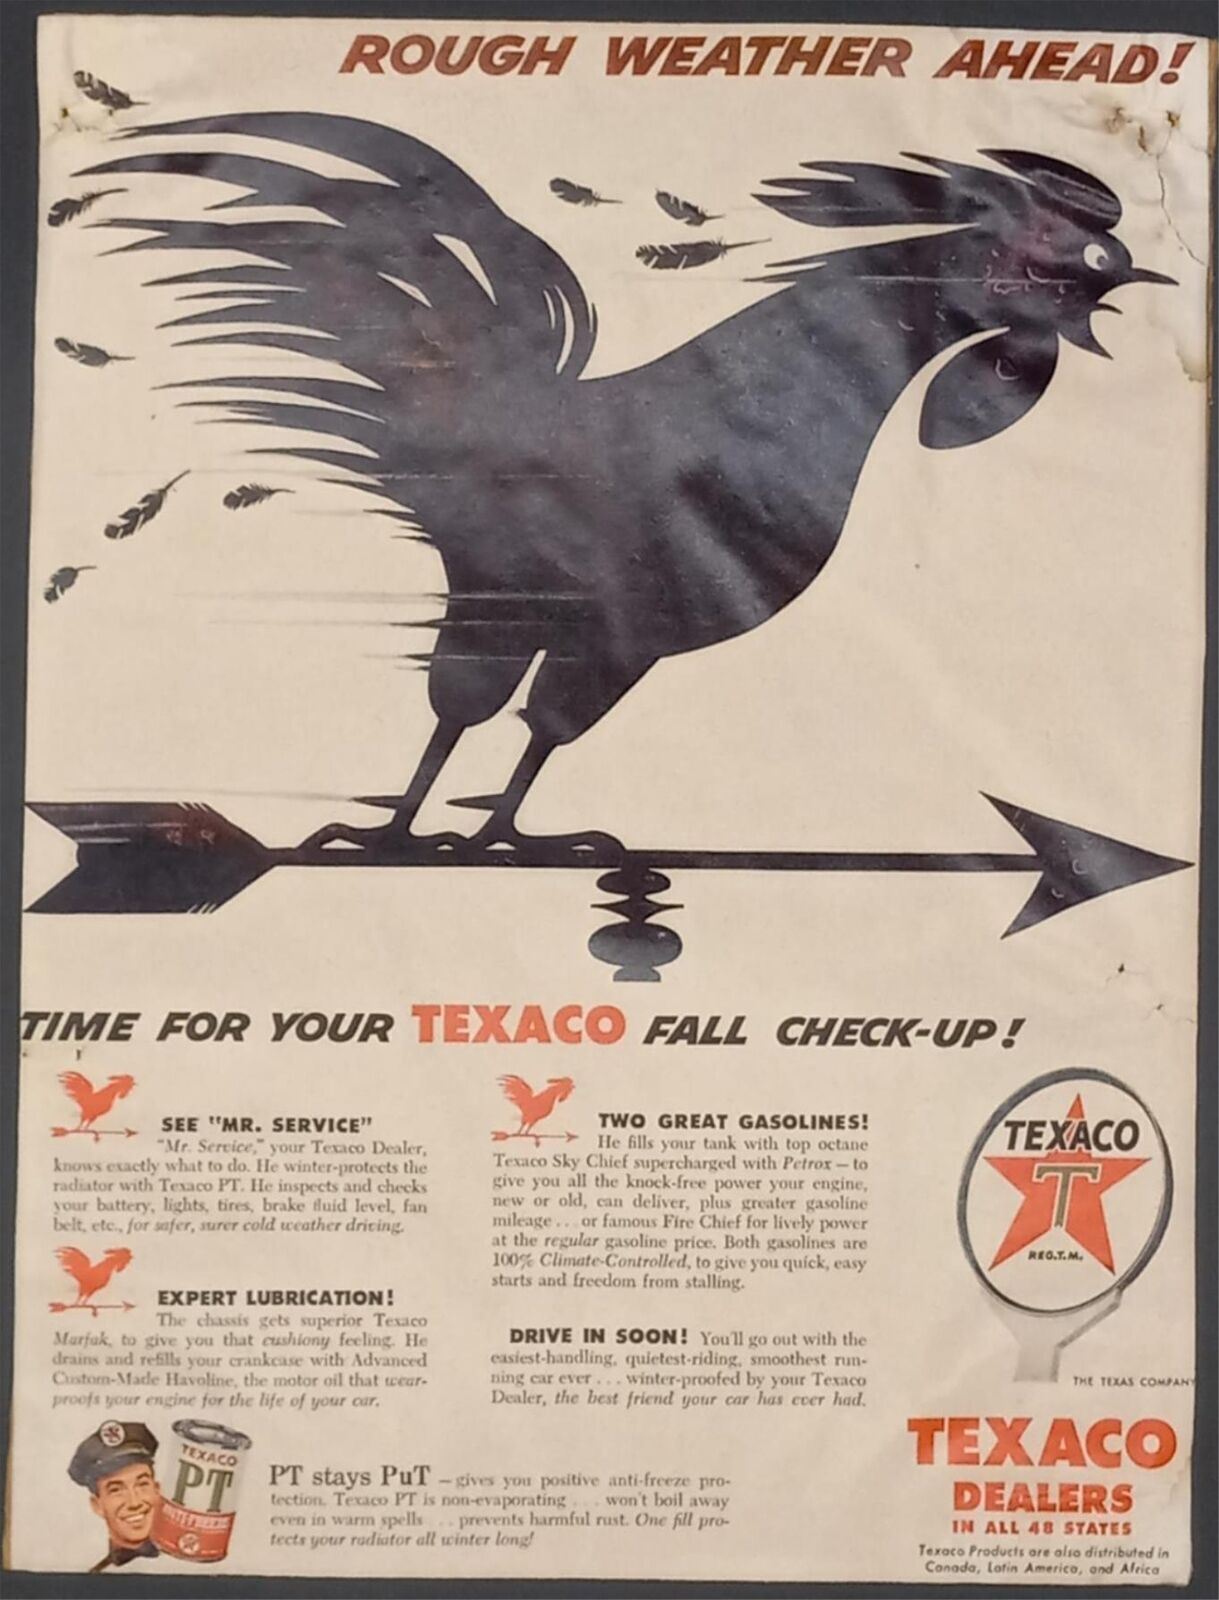 1940s TEXACO PT ROOSTER WEATHER VANE ROUGH WEATHER VINTAGE ADVERTISMENT OS1